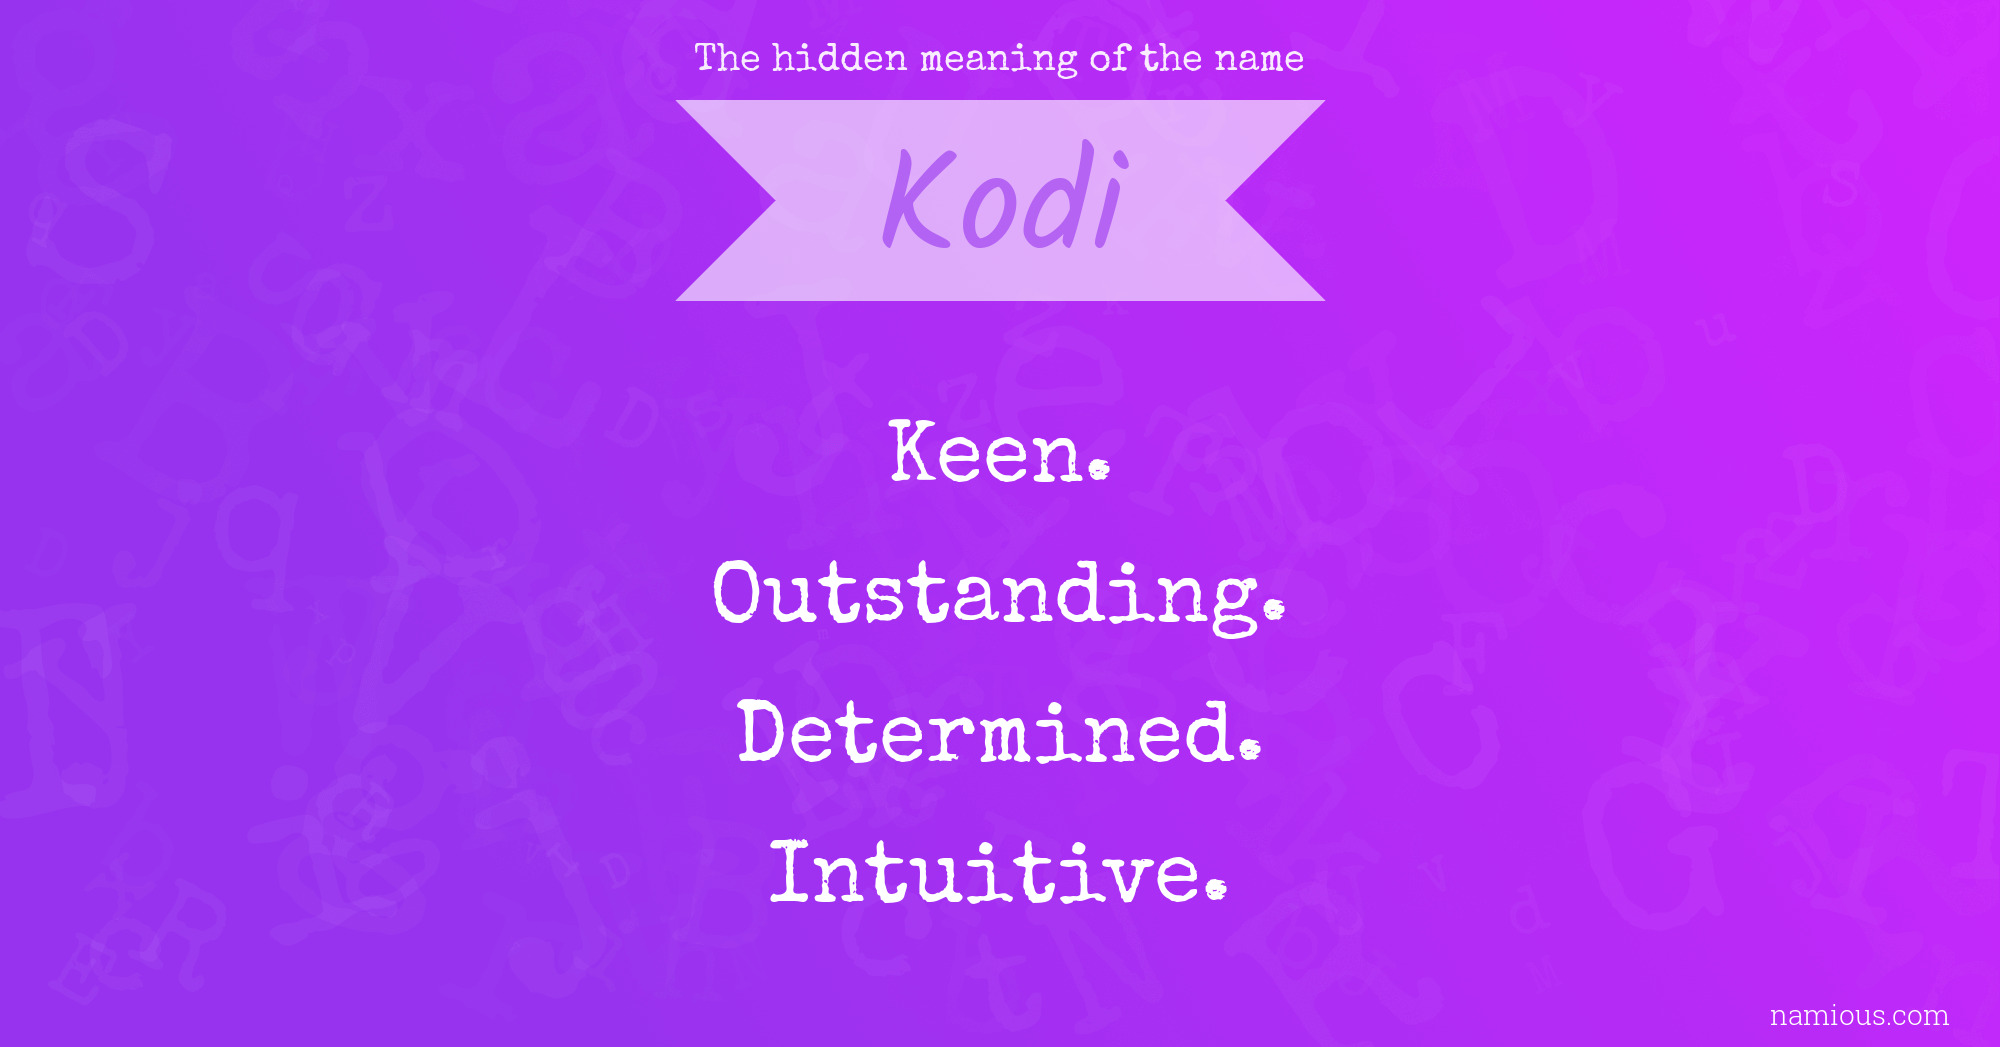 The hidden meaning of the name Kodi